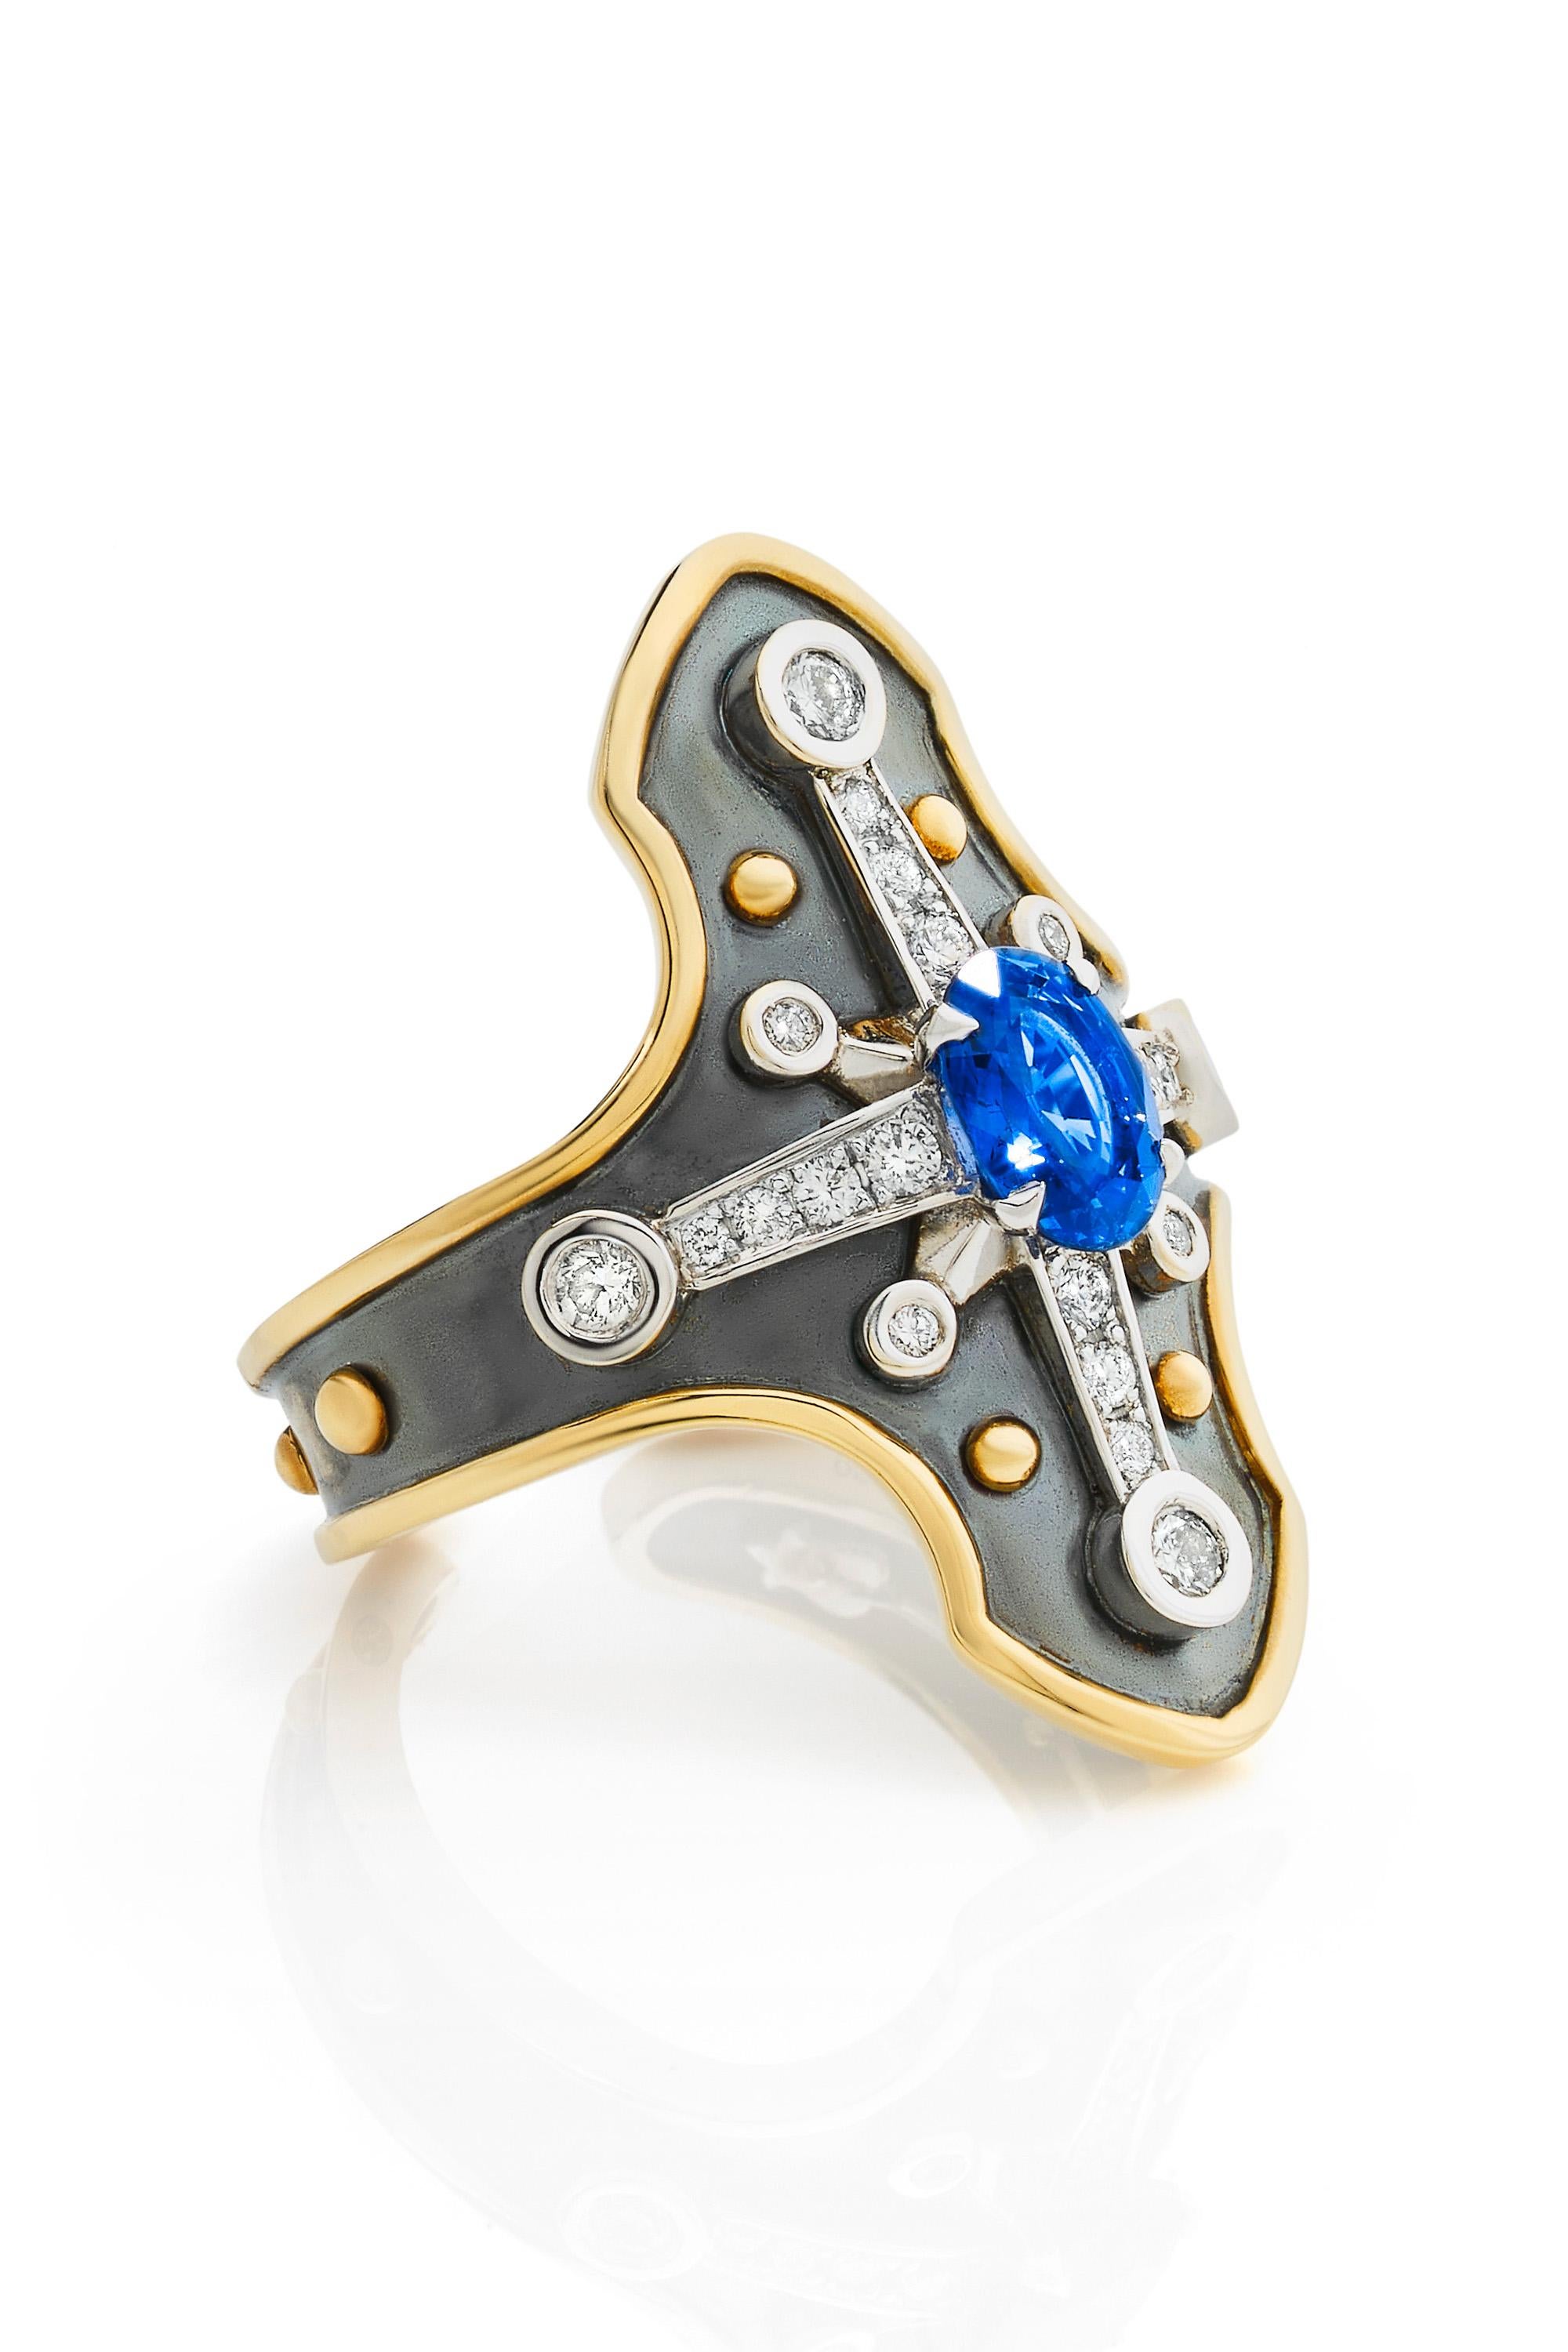 Yellow gold and distressed silver ring studded with an oval sapphire surrounded by diamonds set on a white gold star.

Details:
Sapphire: 7x5x 0,9 cts
22 Diamonds : 0.36 cts    
18k Gold: 4.5 g 
Distressed Silver: 3 g
Made in France